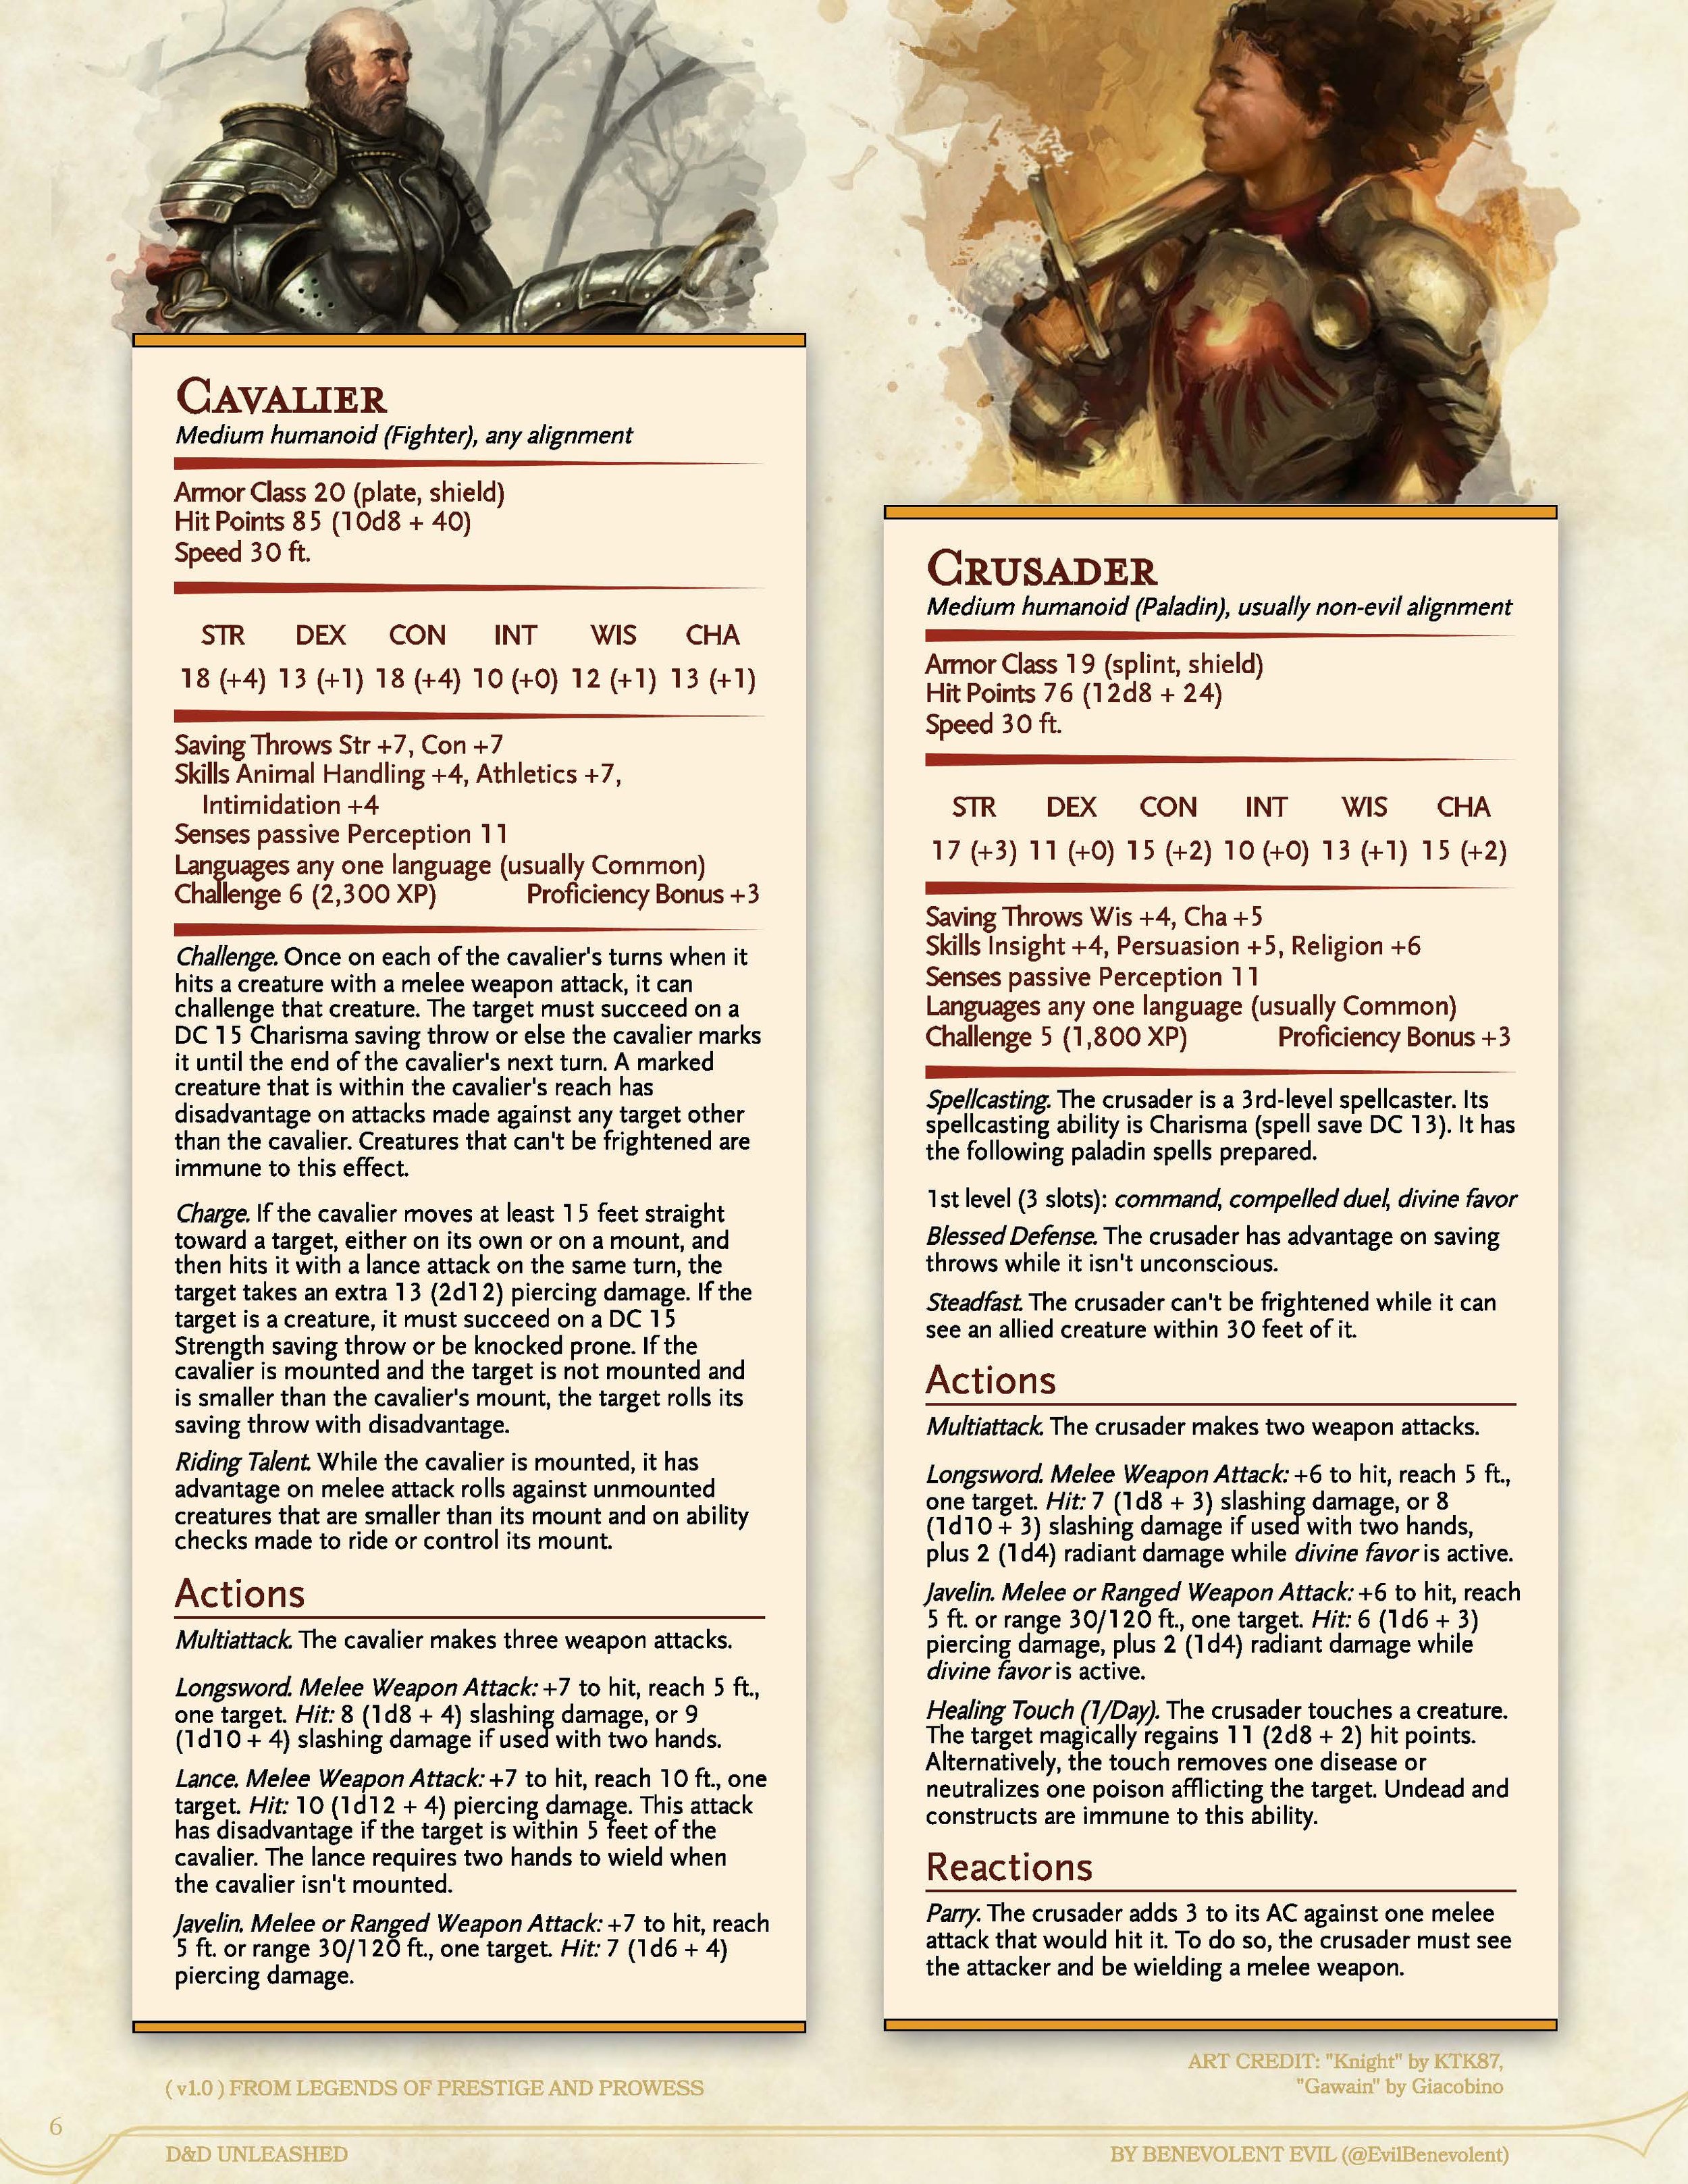 D&D Unleashed - Assorted Humanoid NPCs (v1_0)_Page_06.jpg